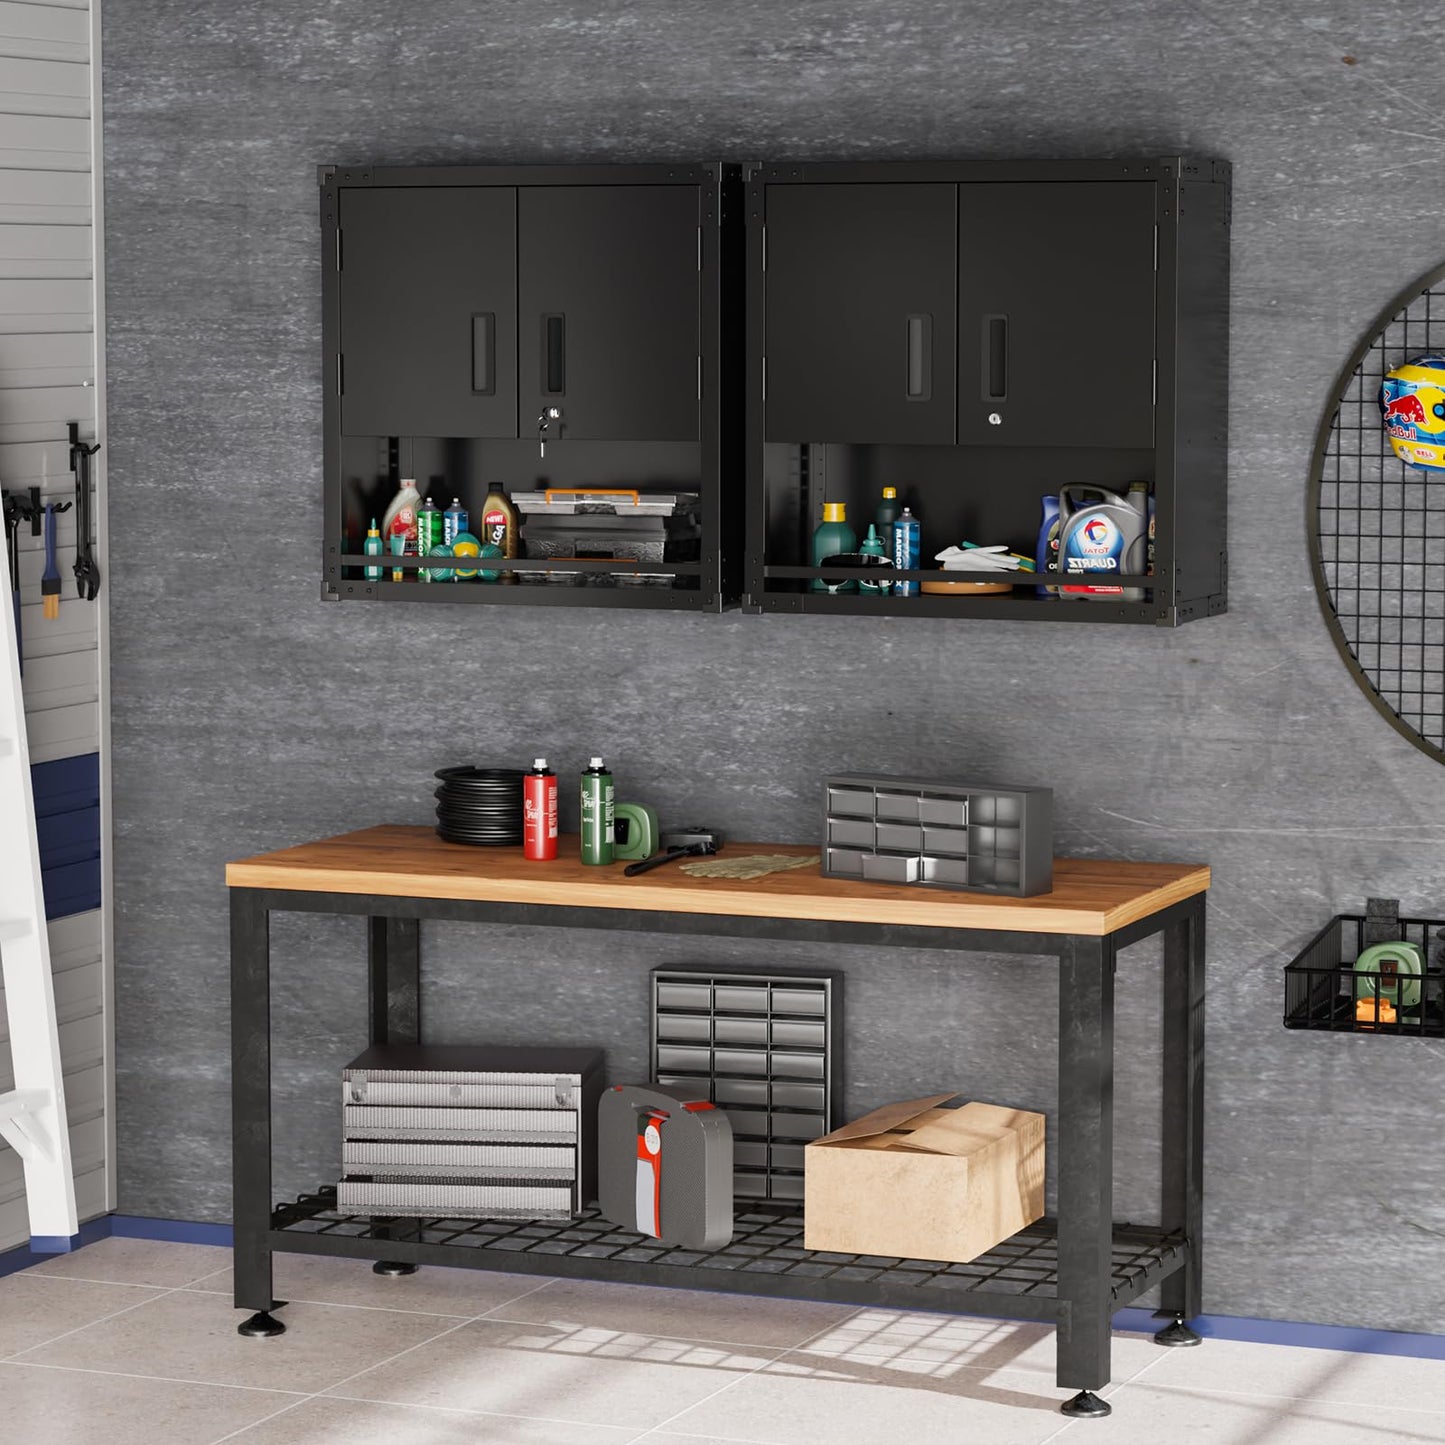 VINGLI Garage Wall Cabinet with Locking Doors and Adjustable Shelf, Metal Wall Cabinet, Floating Upper Storage Cabinet (Black, 30''W x 12''D x 30''H)